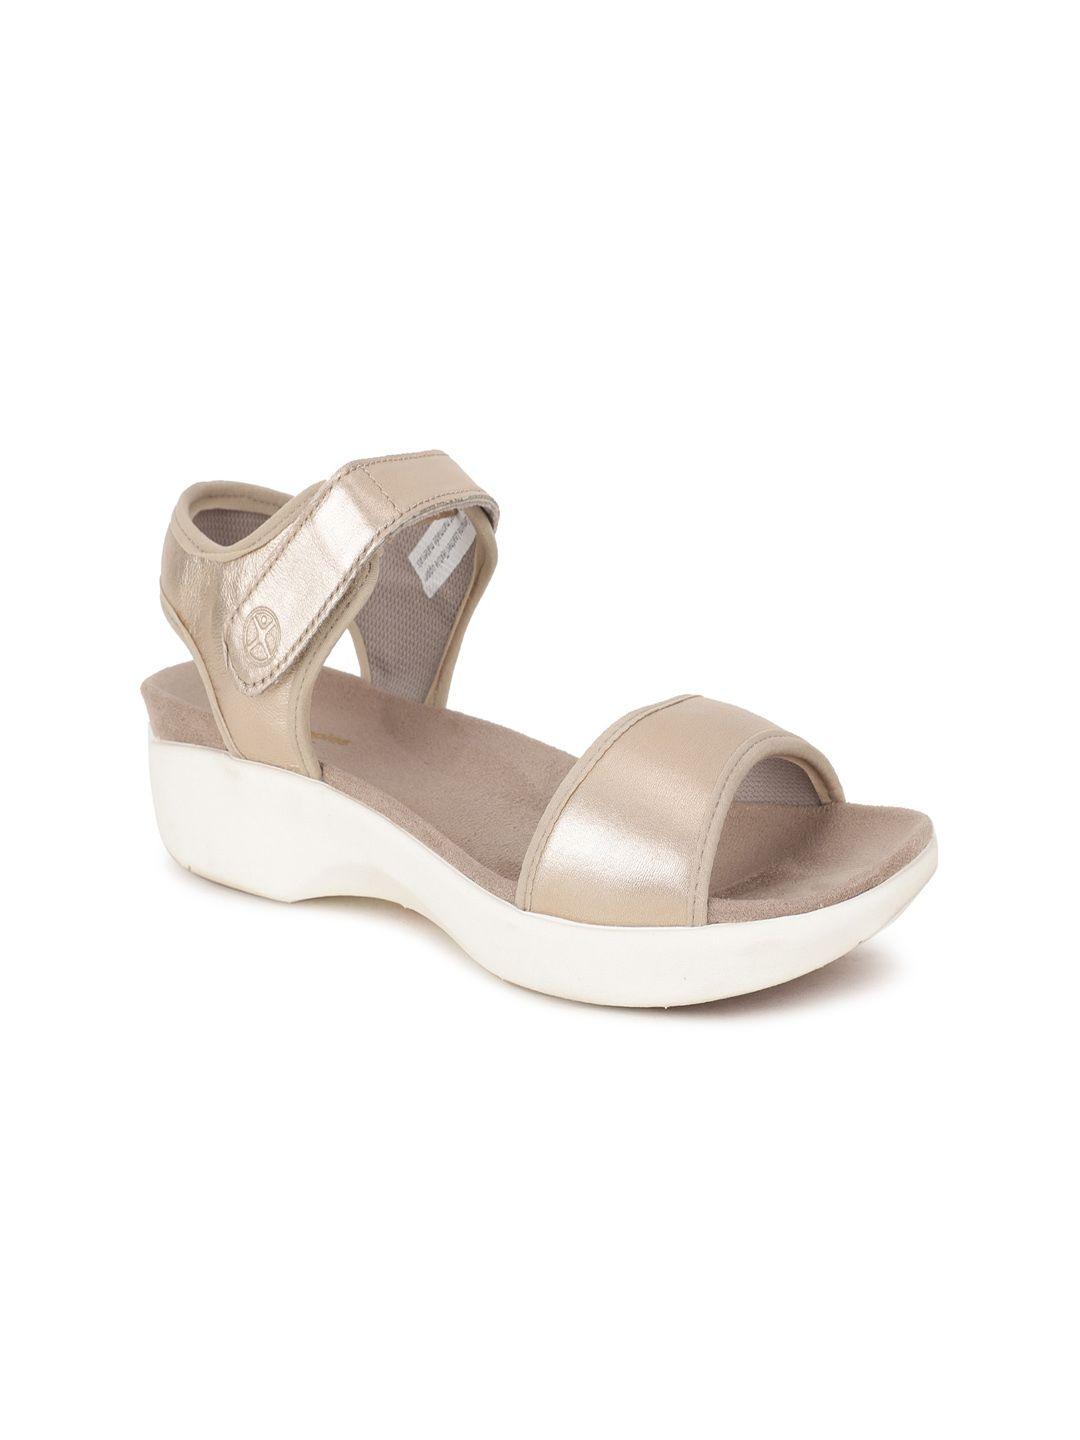 hush-puppies-silver-toned-leather-wedge-peep-toes-with-buckles